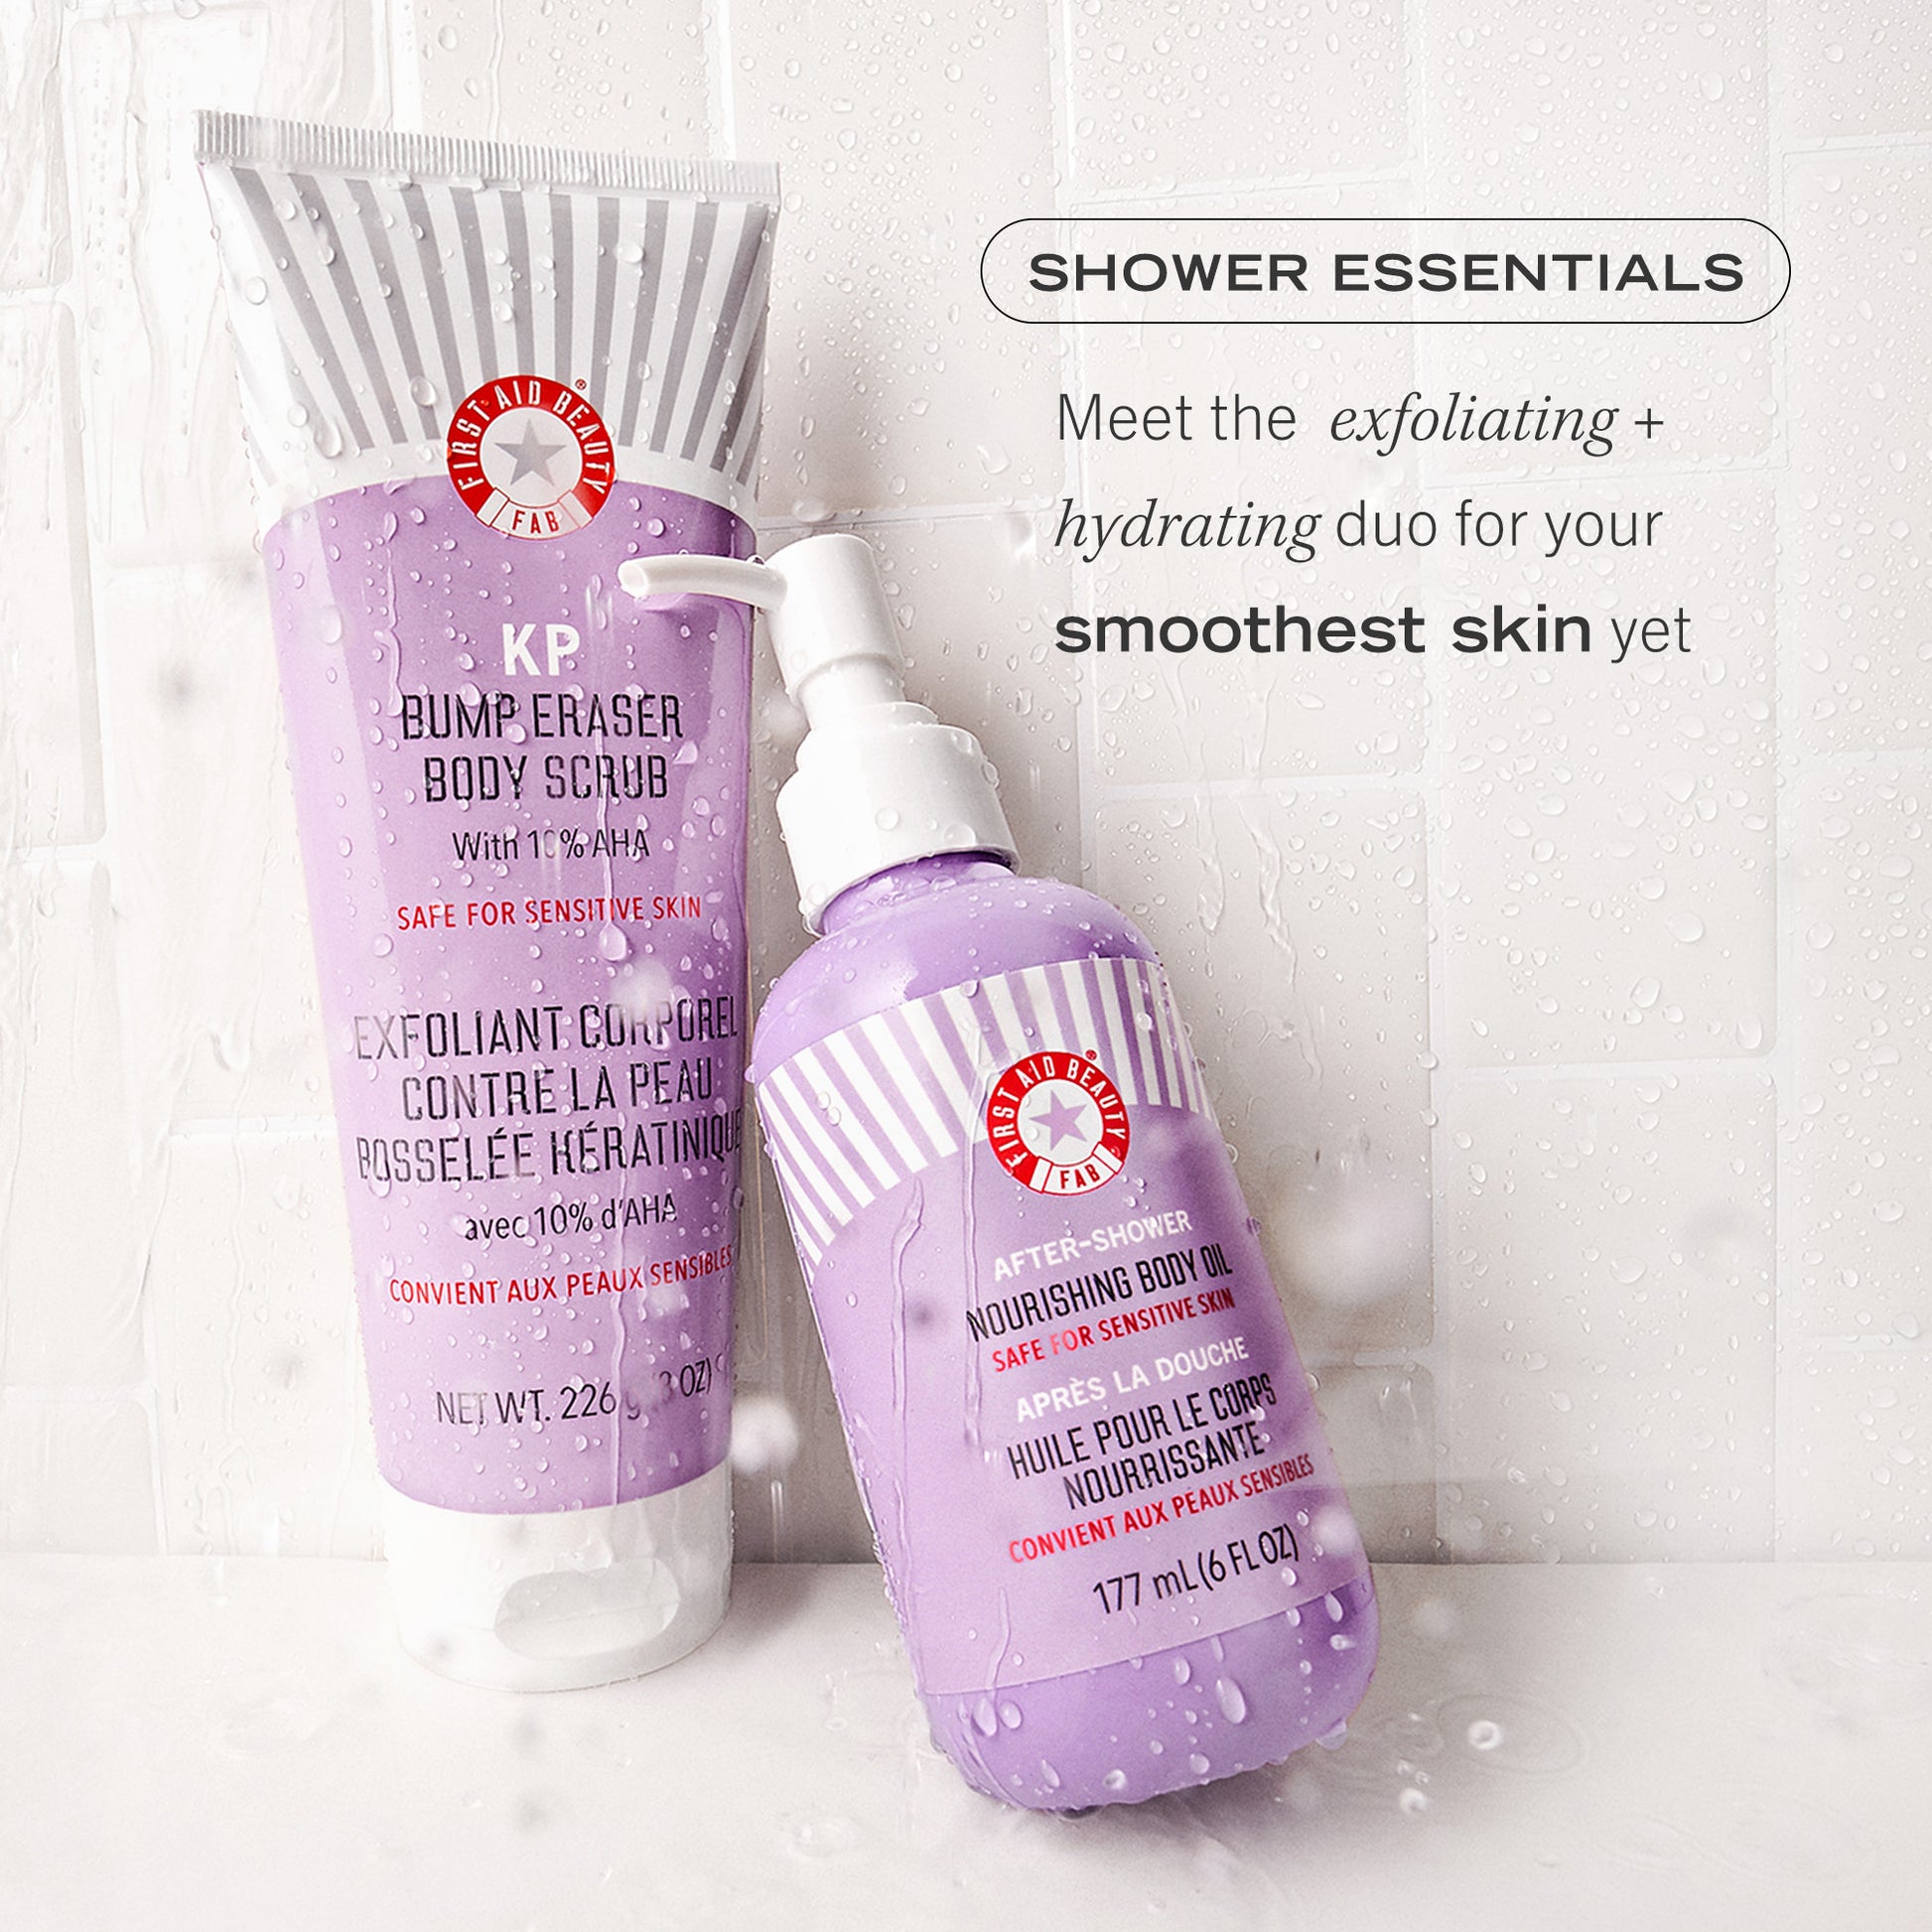 KP Bumper Eraser Body Scrub with After-Shower Nourishing Body Oil in shower.  Shower Essentials: Meet the exfoliating + hydrating duo for your smoothest skin yet.